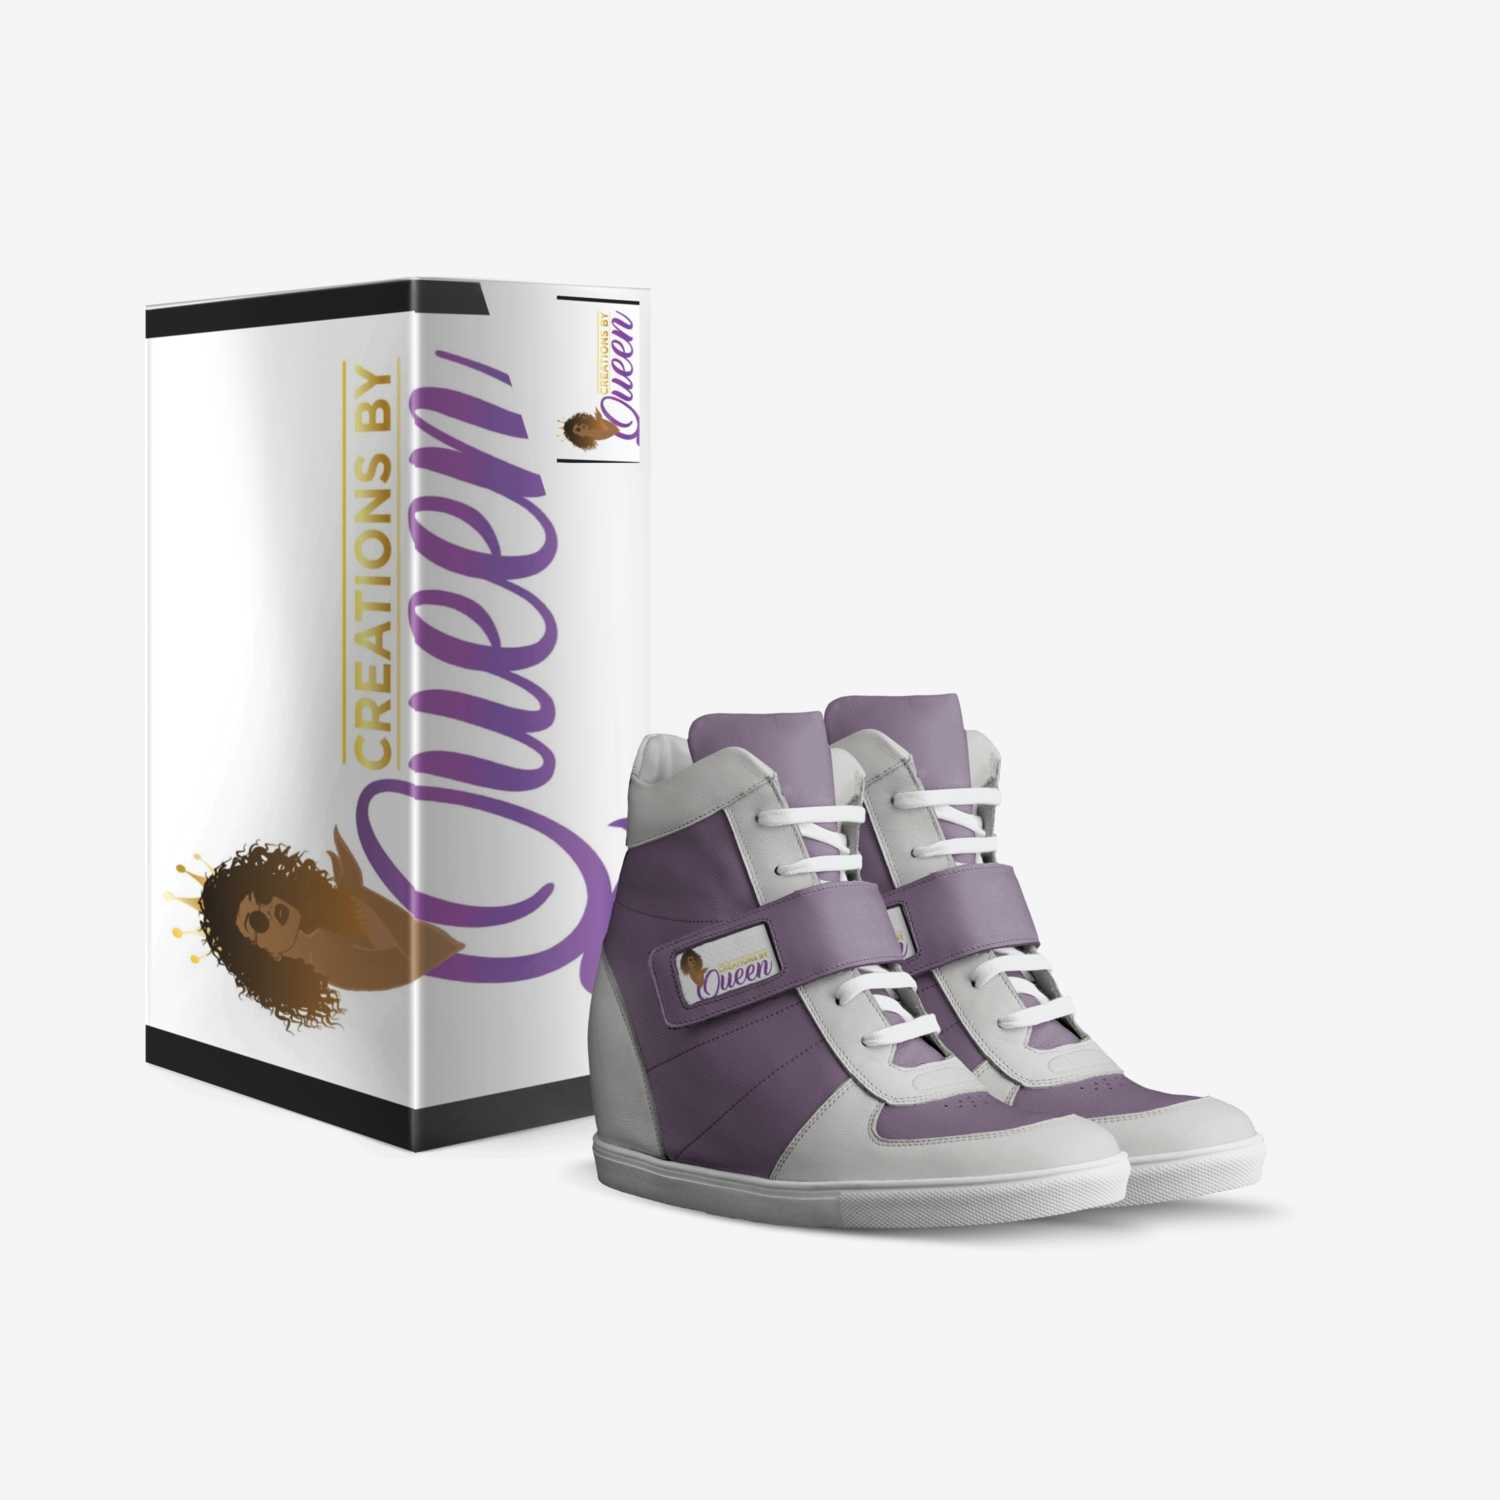 QUEENS C 1'S custom made in Italy shoes by Jaydon Omega | Box view